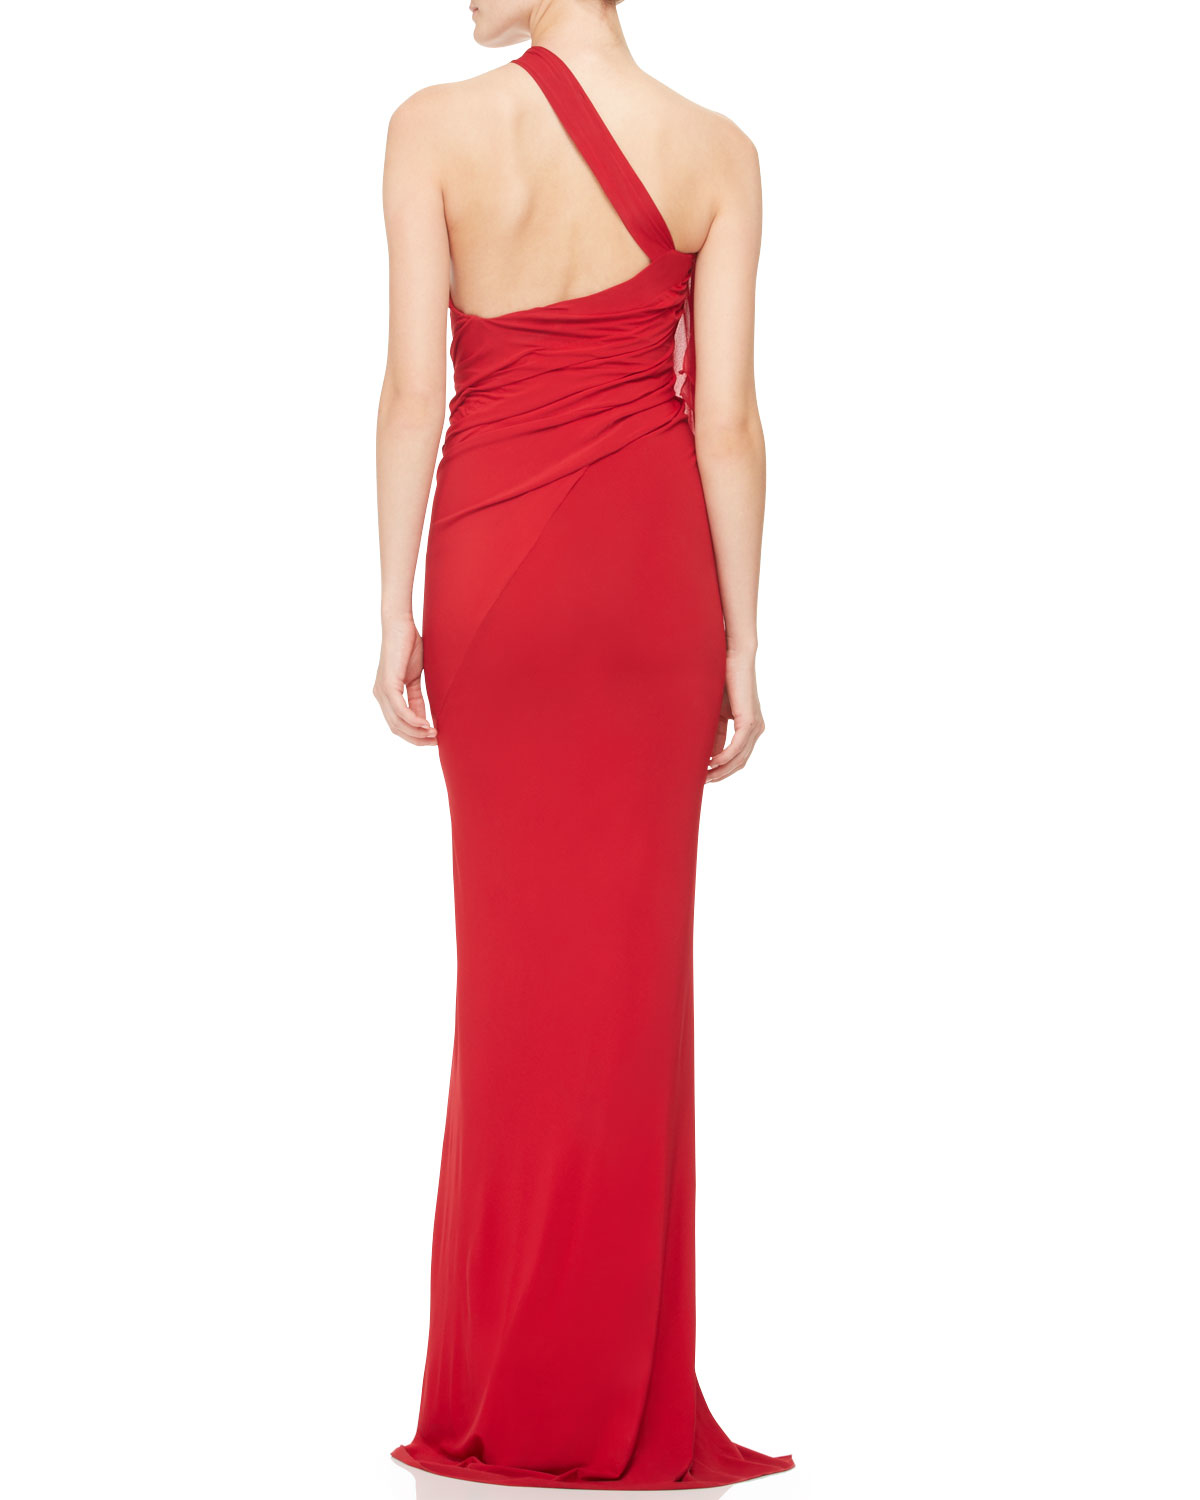 Lyst - Donna Karan Draped One-Shoulder Evening Gown in Red